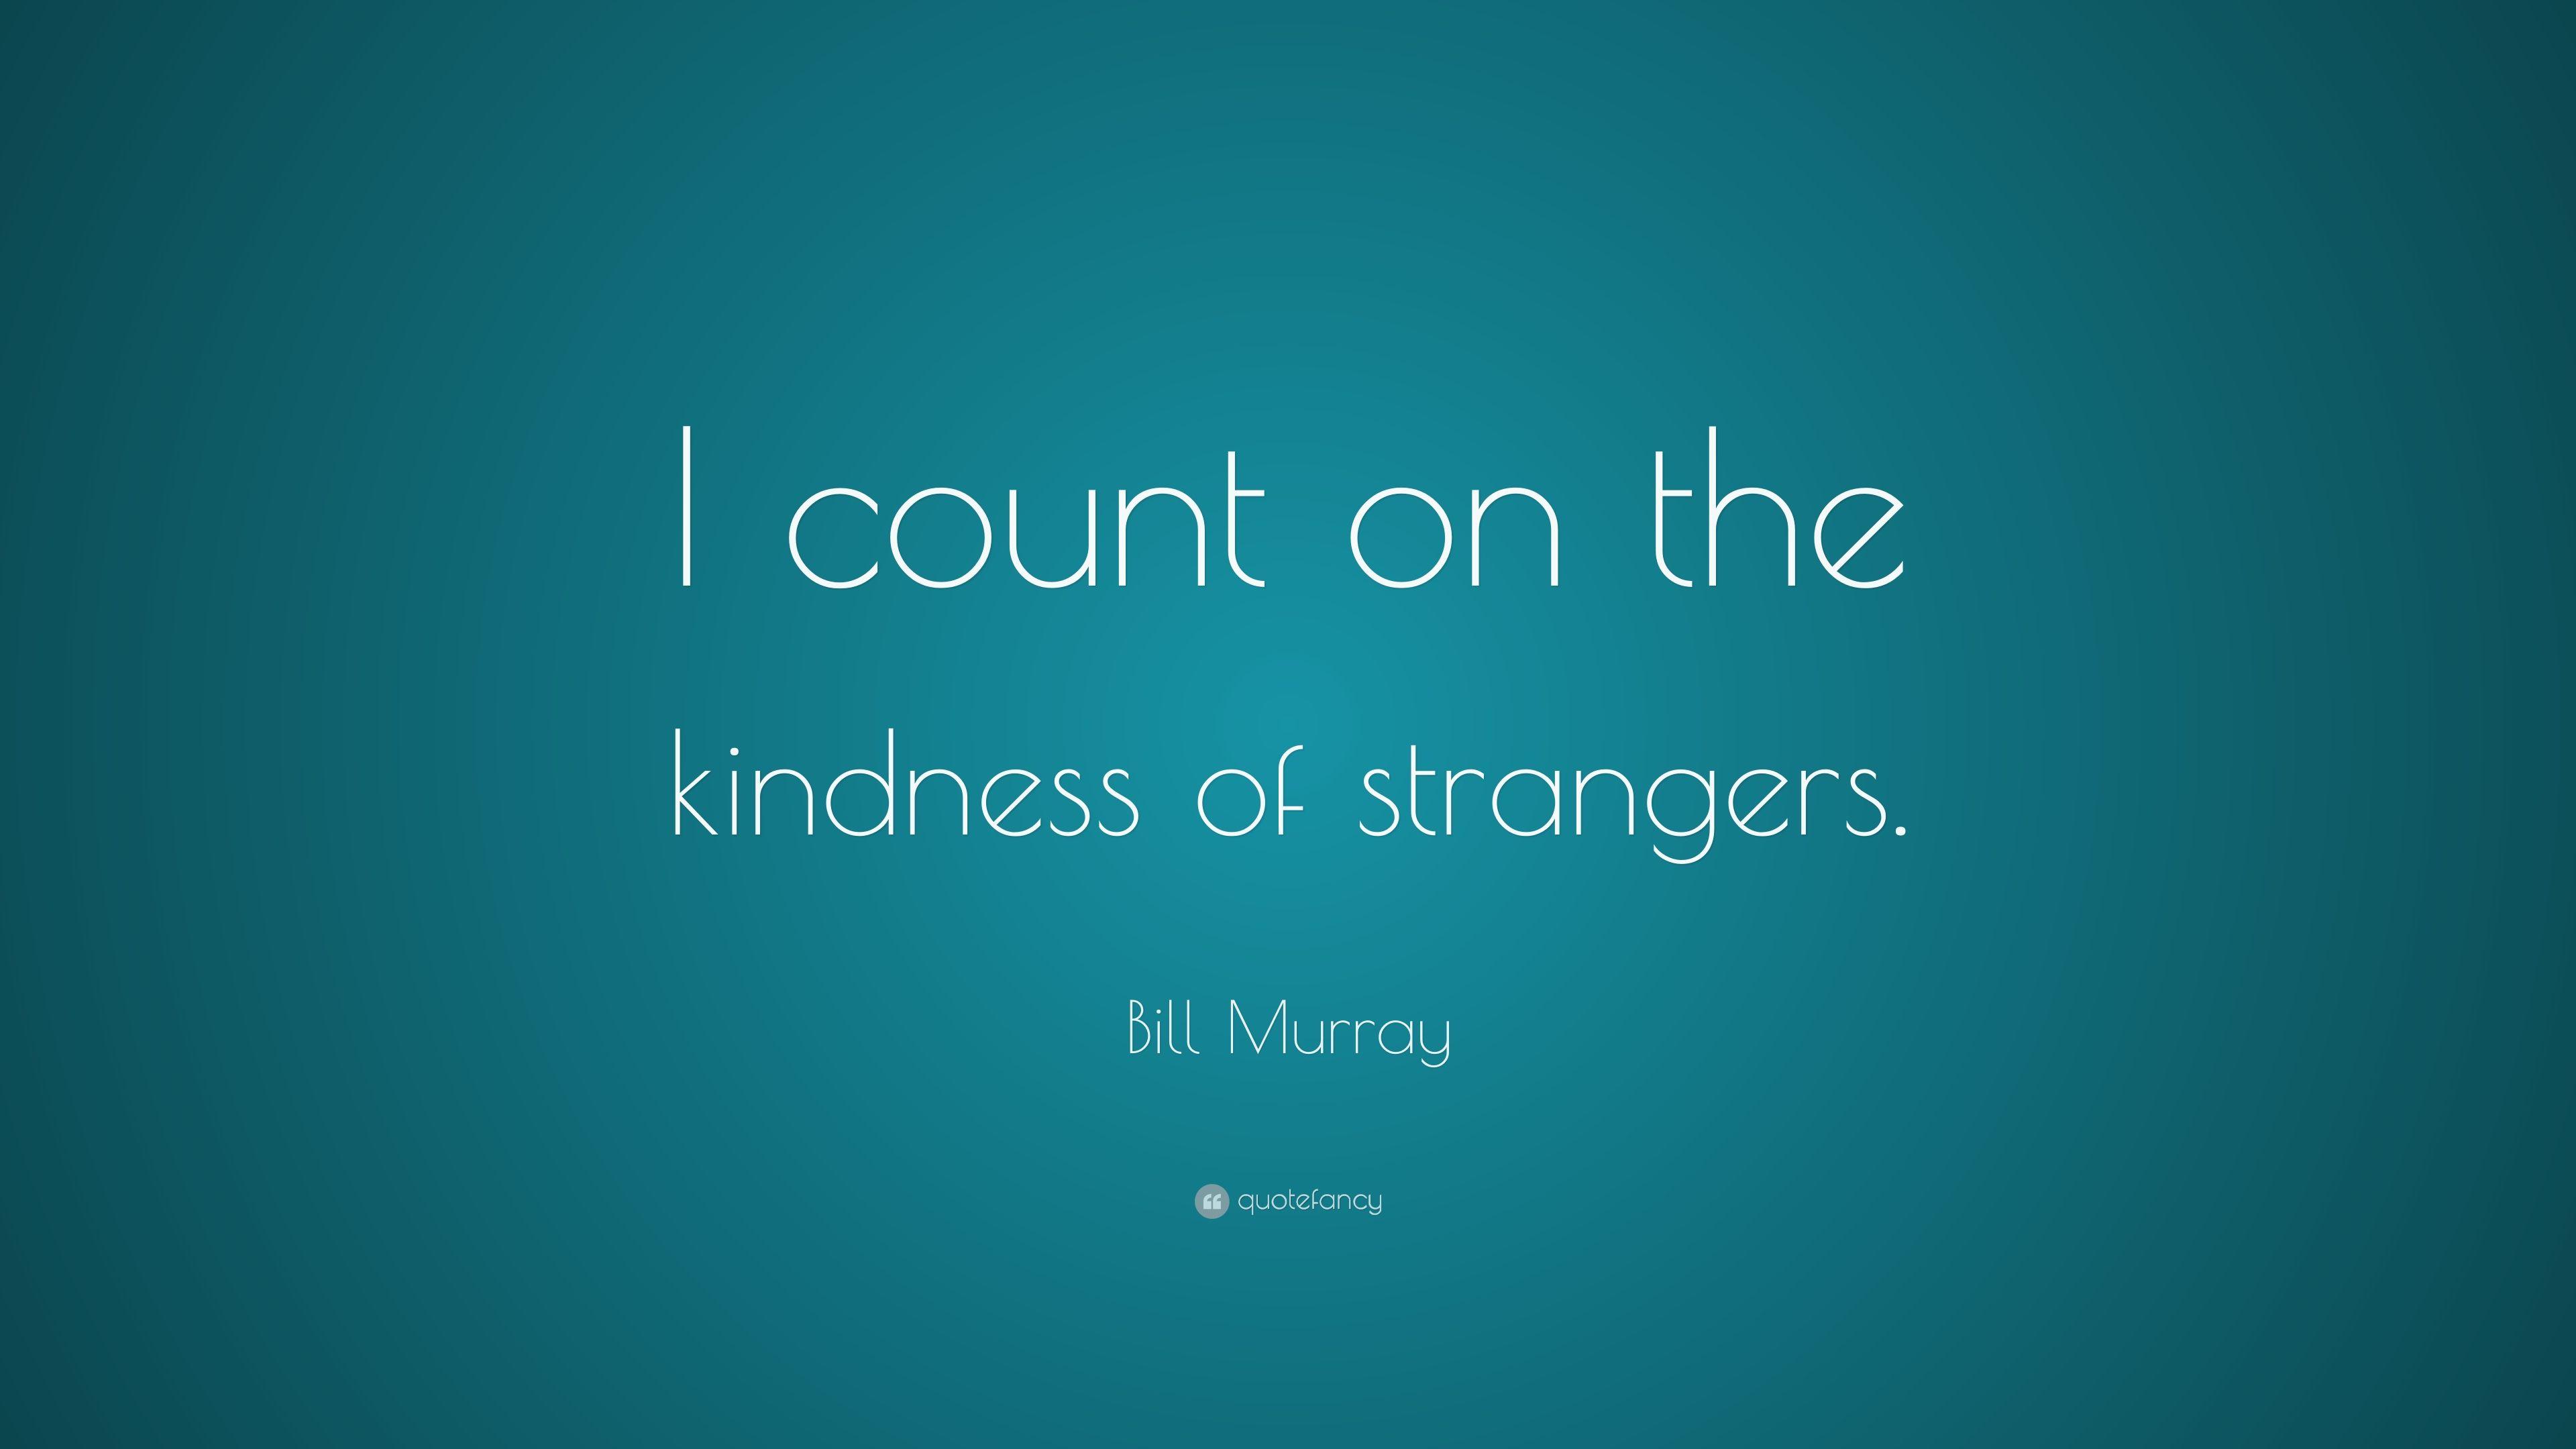 Bill Murray Quote: “I count on the kindness of strangers.” 7